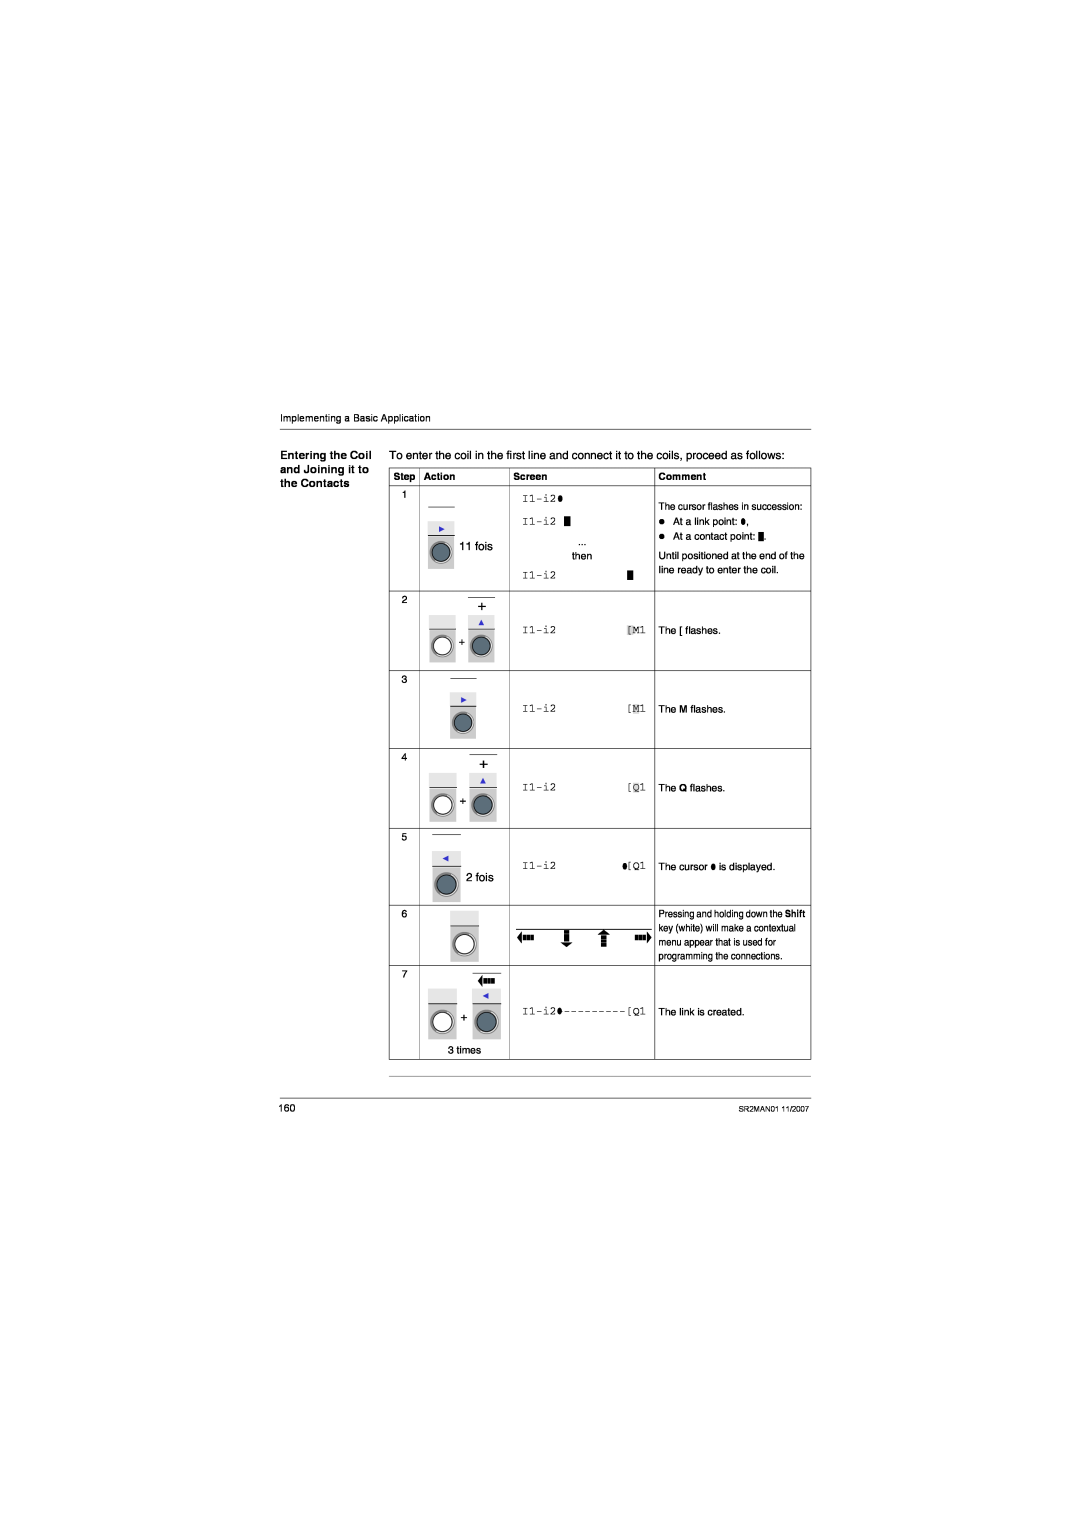 Schneider Electric SR2MAN01 user manual Entering the Coil and Joining it to the Contacts, Step Action, Screen, Comment 